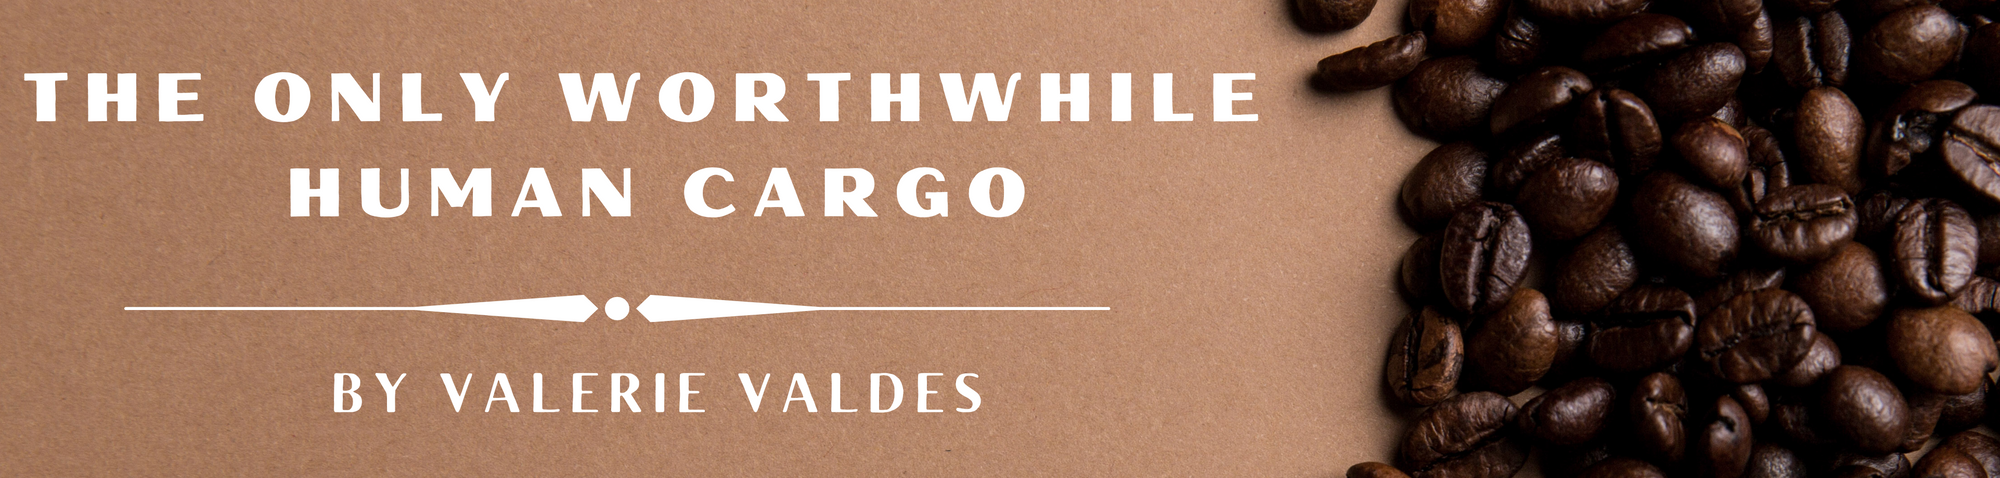 title card with the text, "The Only Worthwhile Human Cargo by Valerie Valdes" in white on a light brown background. To the right is a pile of coffee beans.